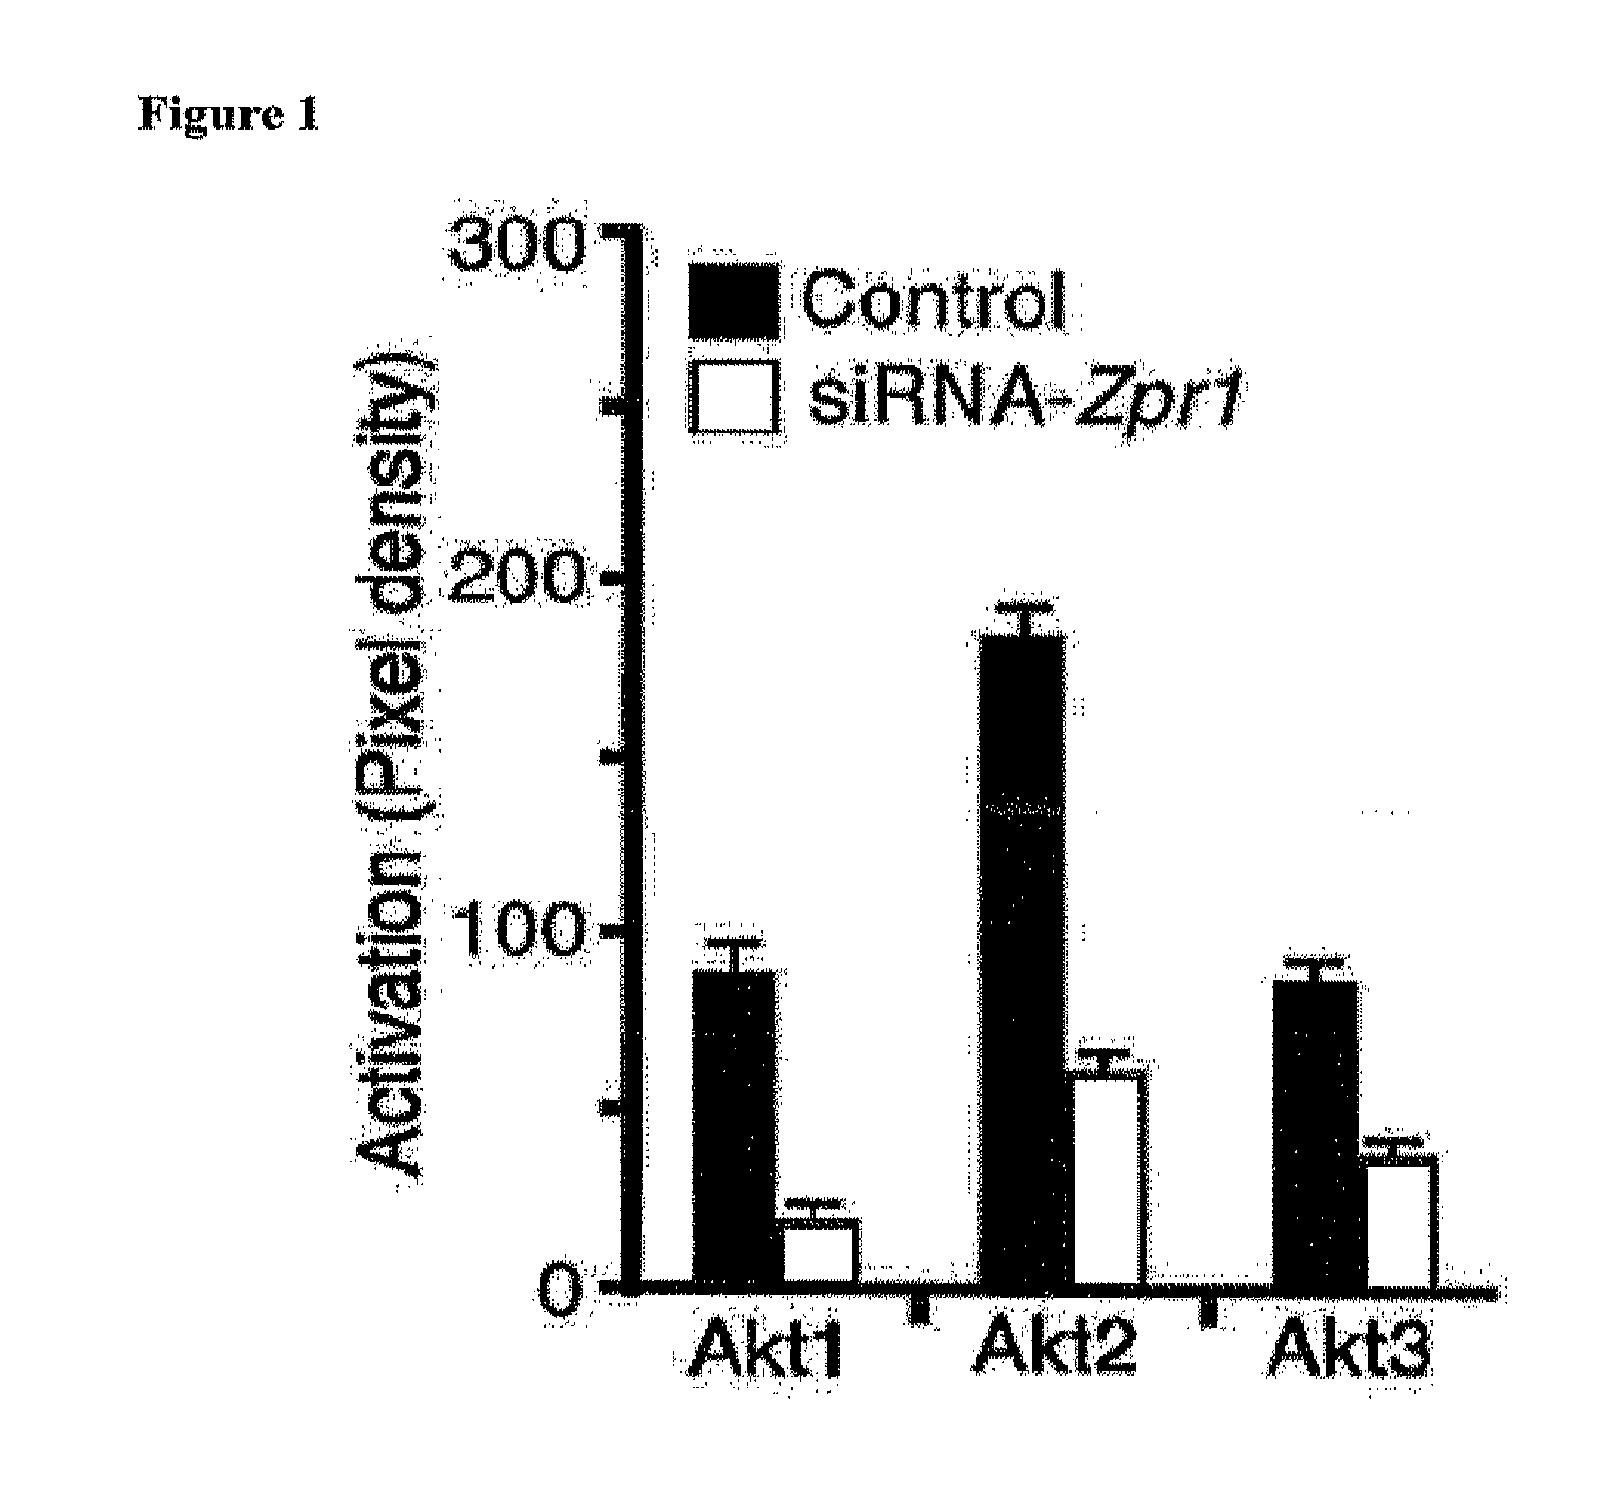 Jnk inhibitors for use in treating spinal muscular atrophy